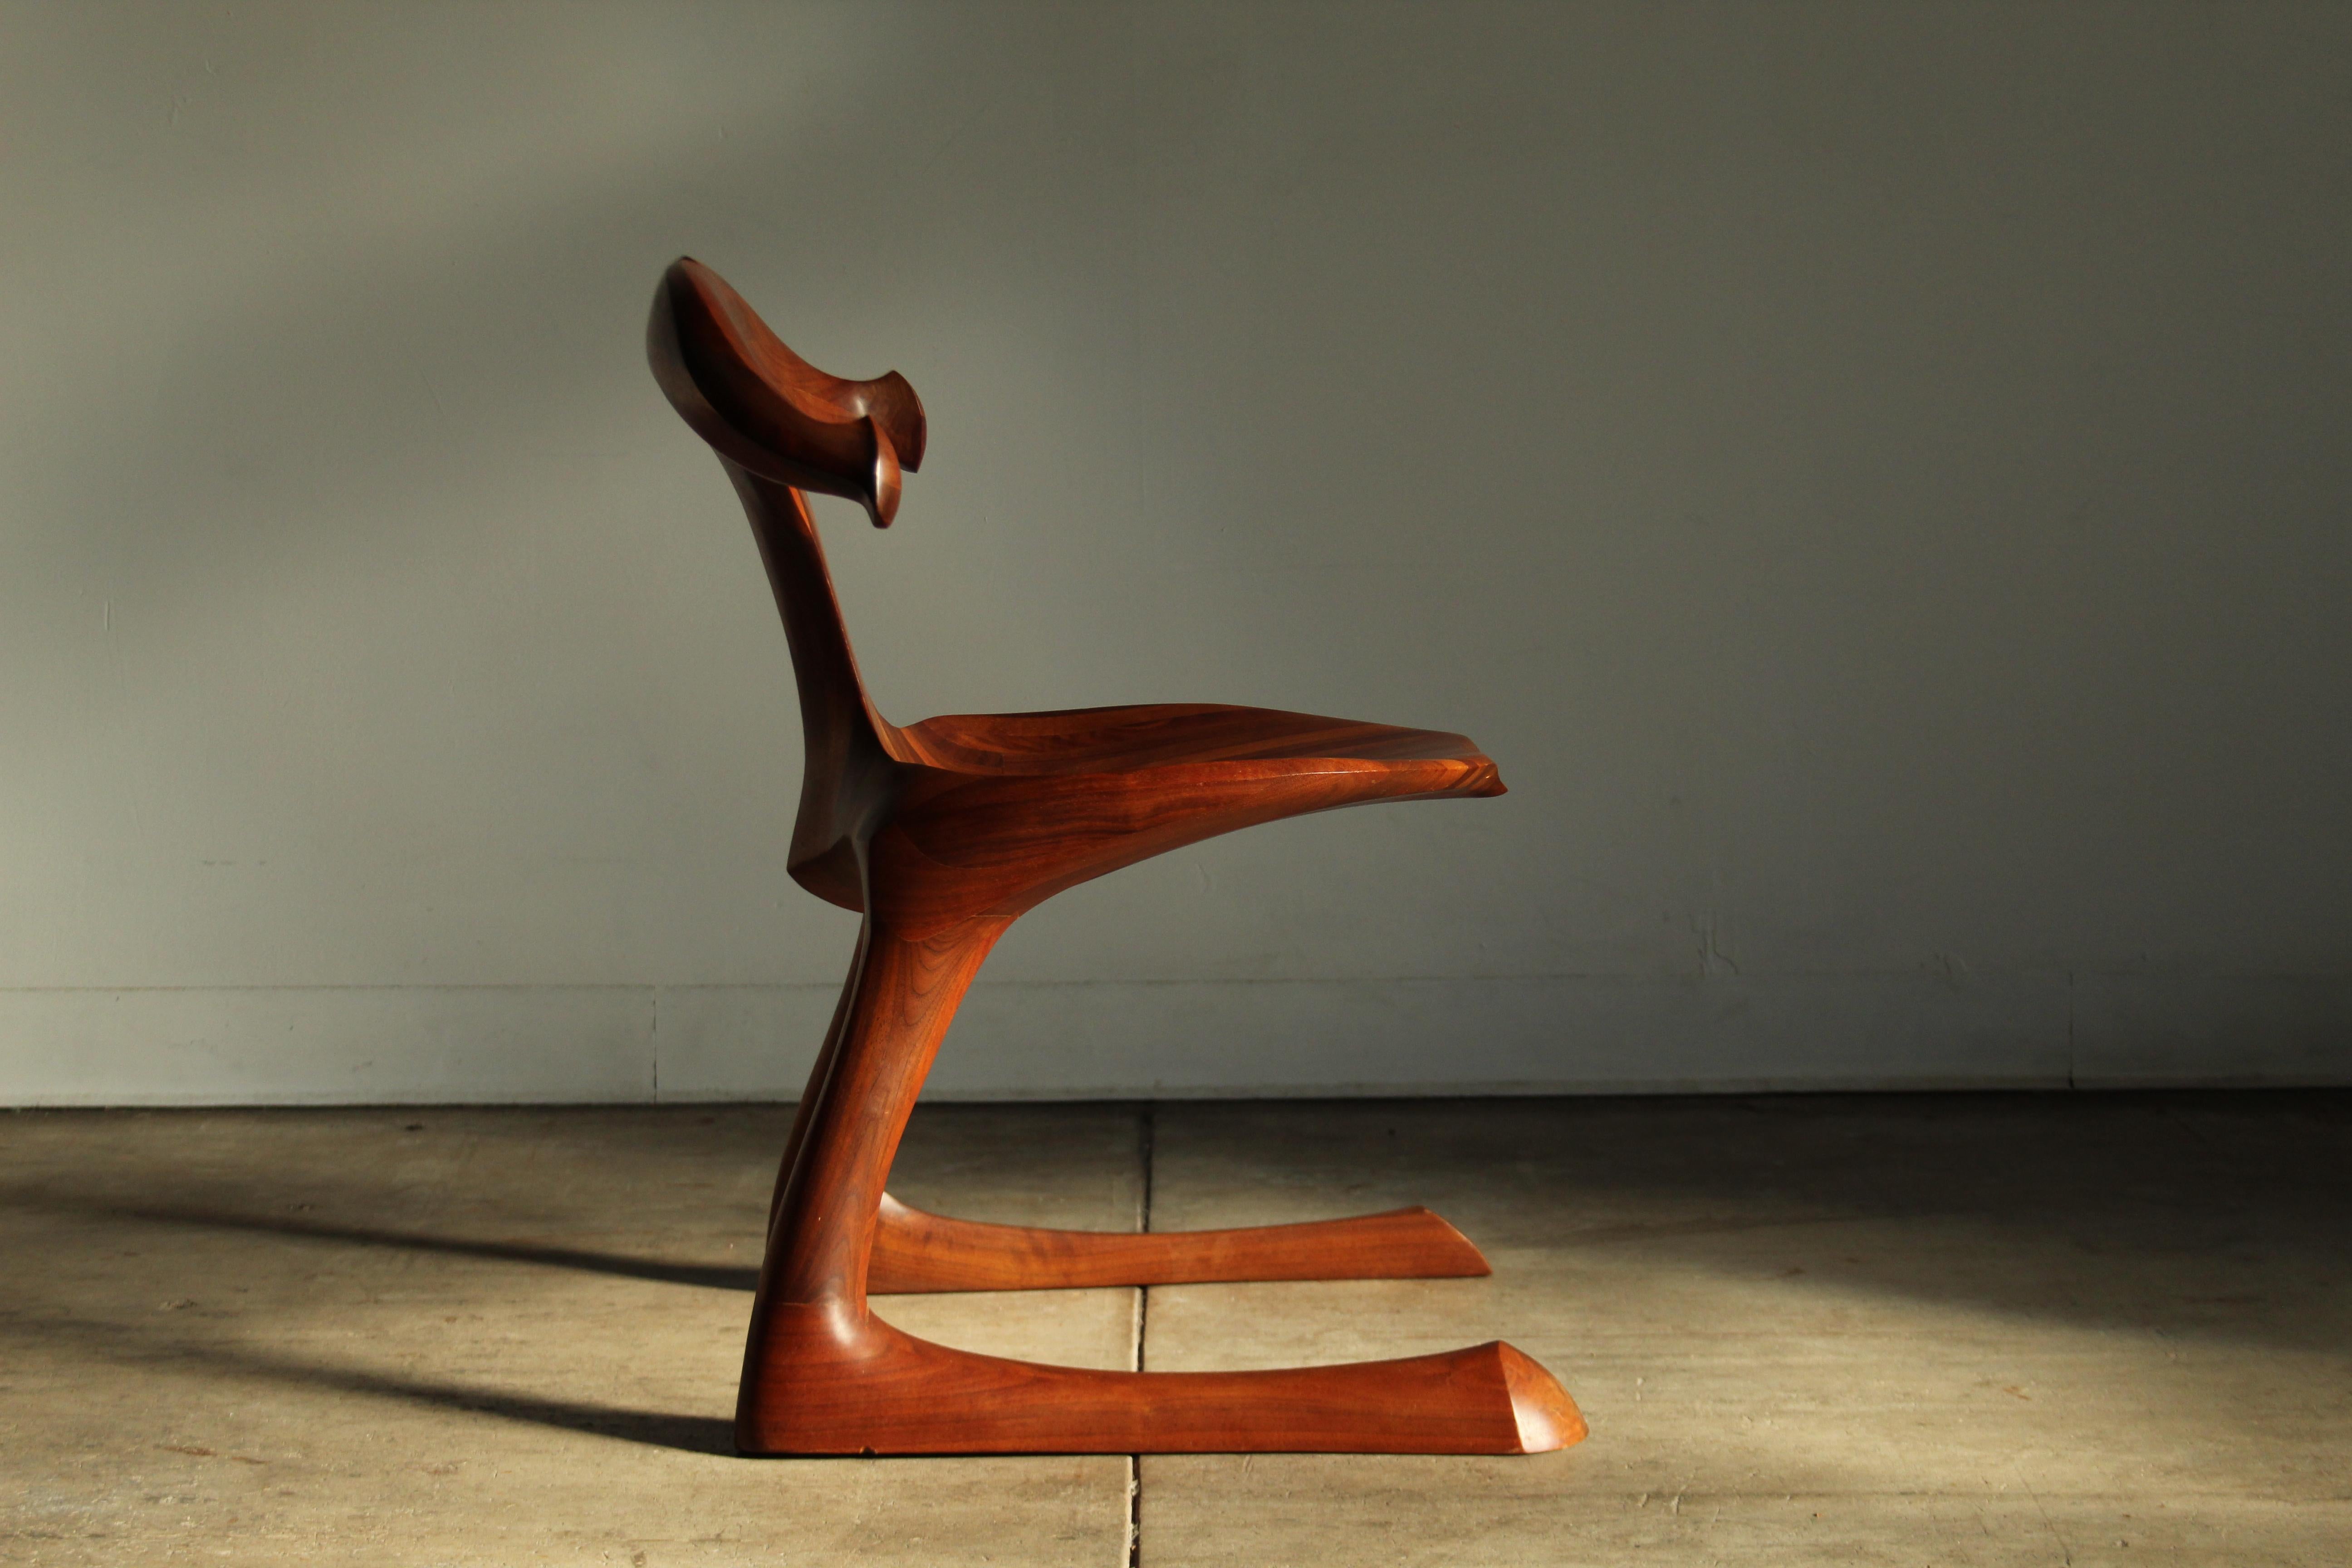 A sublime, one-of-a-kind, sculpted walnut, California studio craft chair attributed to San Diego craftsman Larry Hunter. This stunning piece is equal parts sculpture and equal parts chair. The whimsical cantilevered form brings  life to the piece,